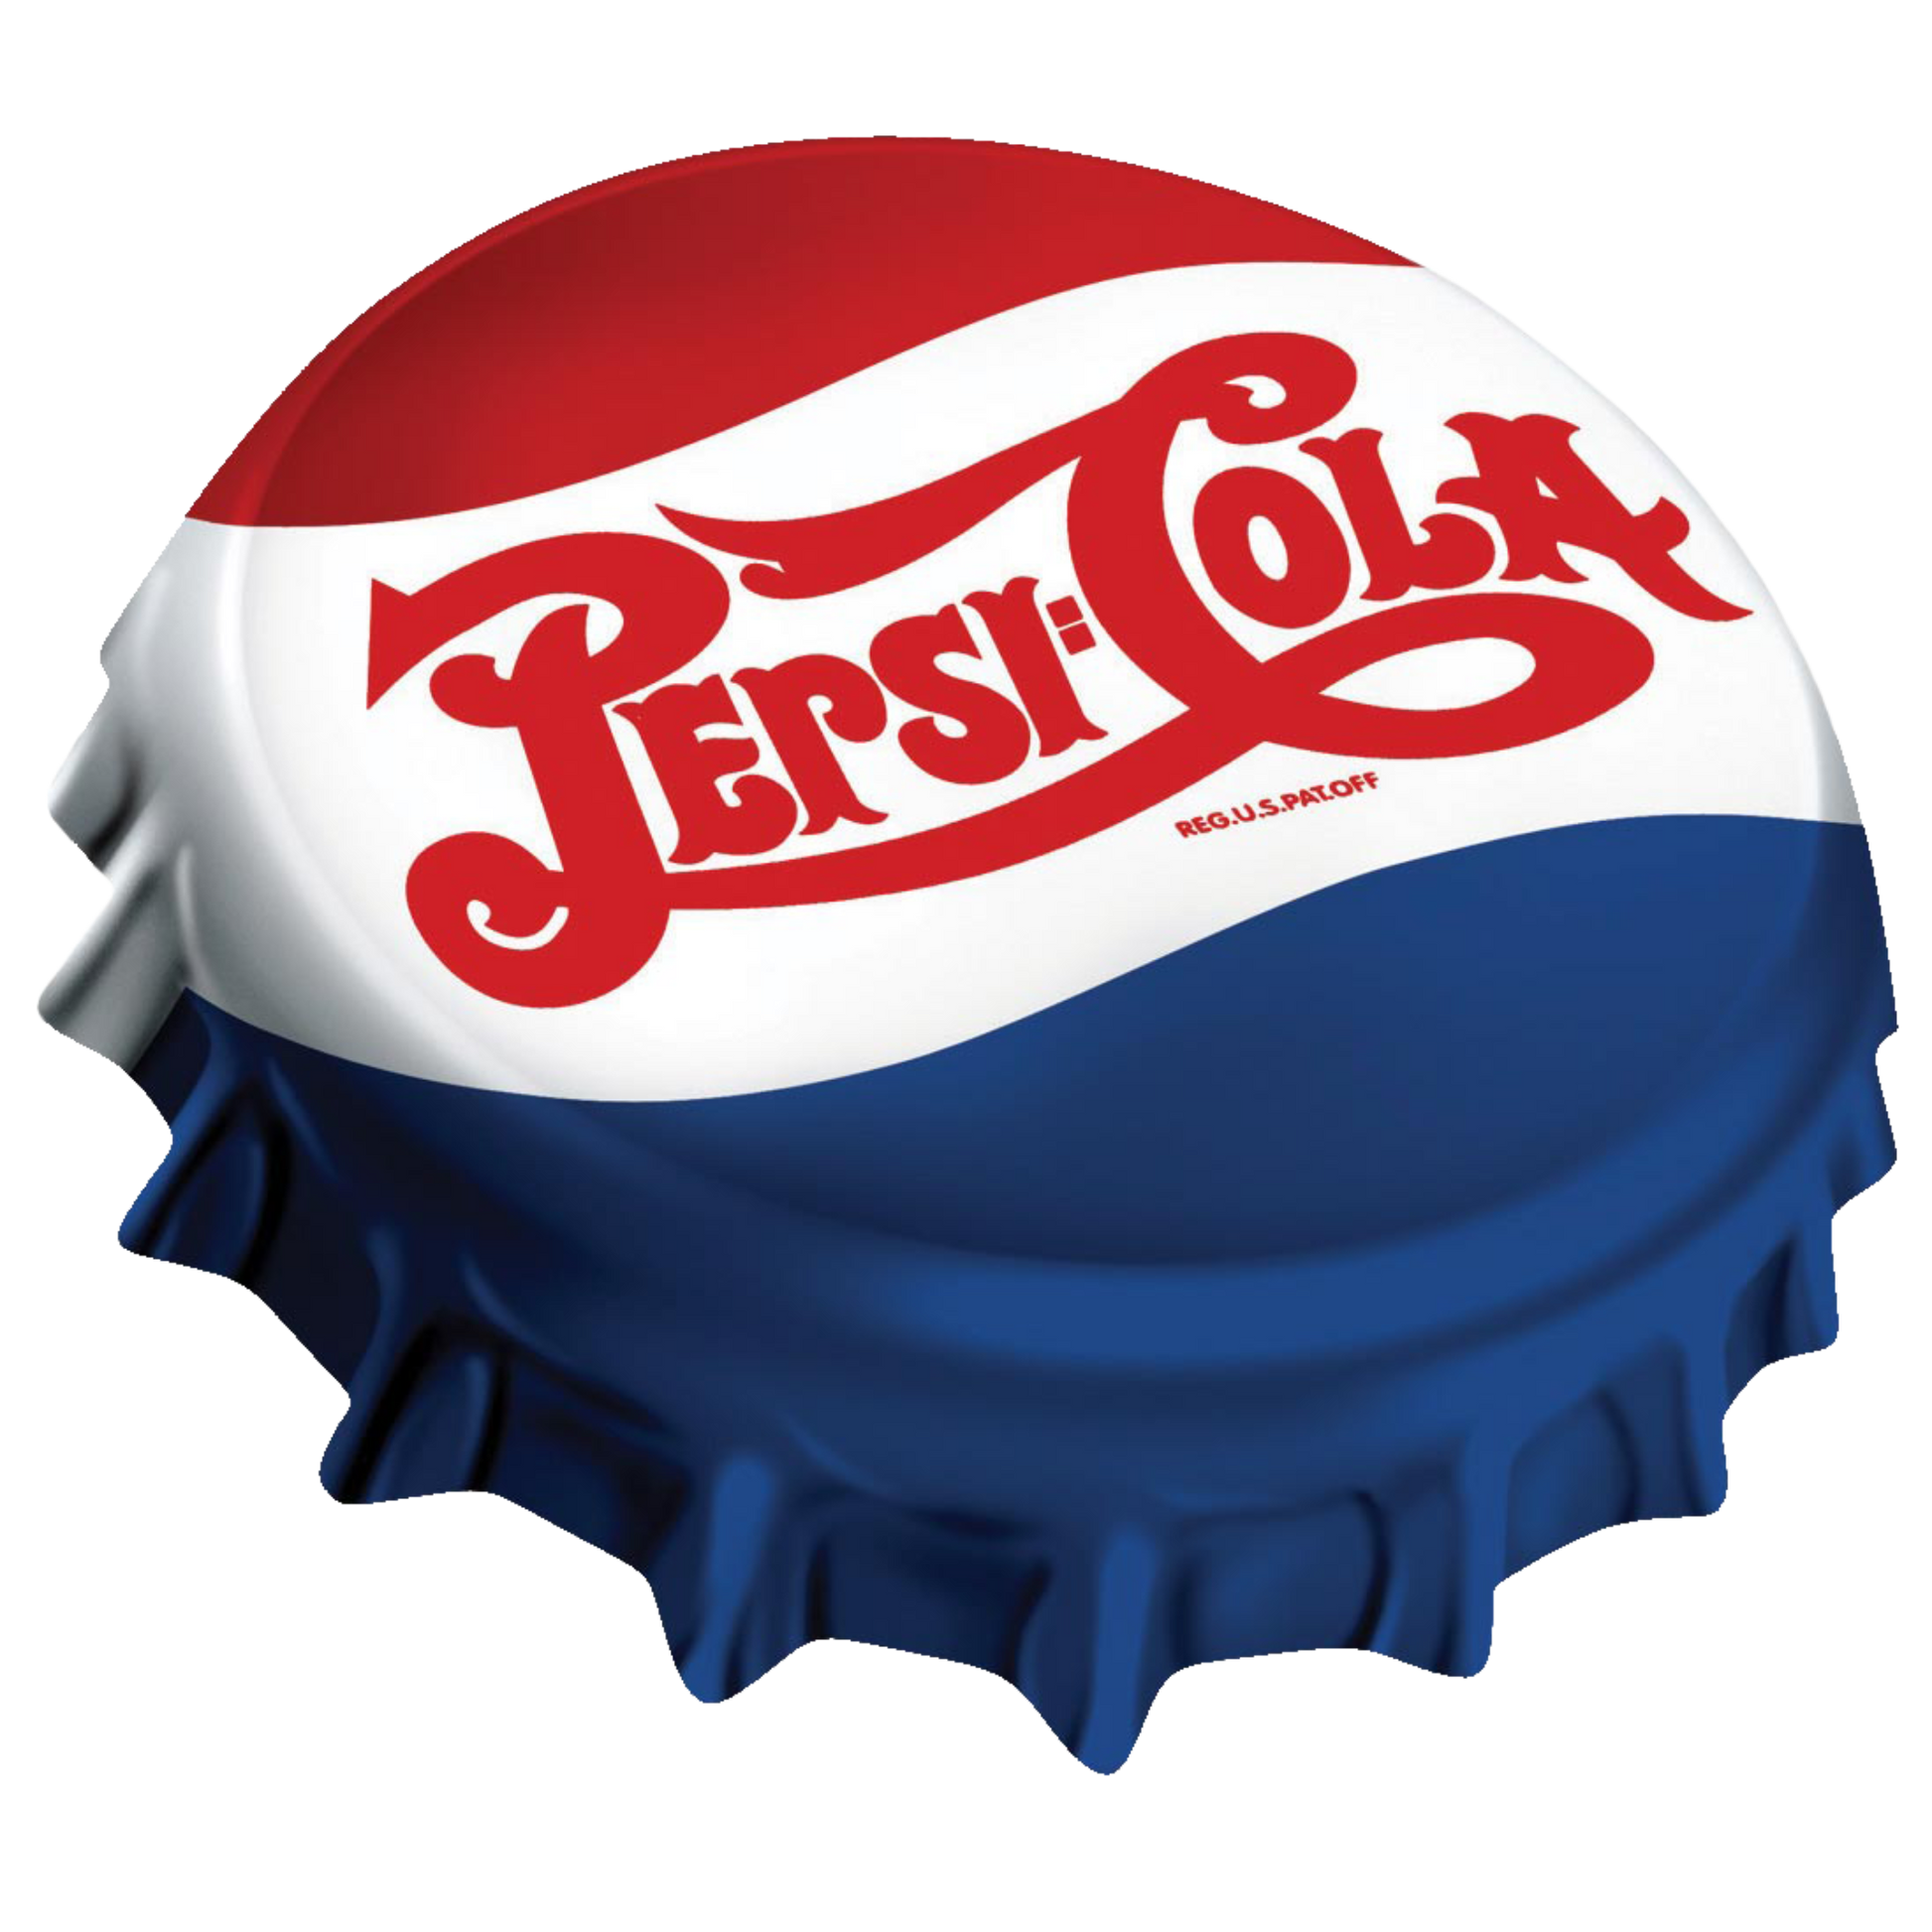 Metallic Pepsi-Cola bottle cap sign in red, white, and blue with vintage design.